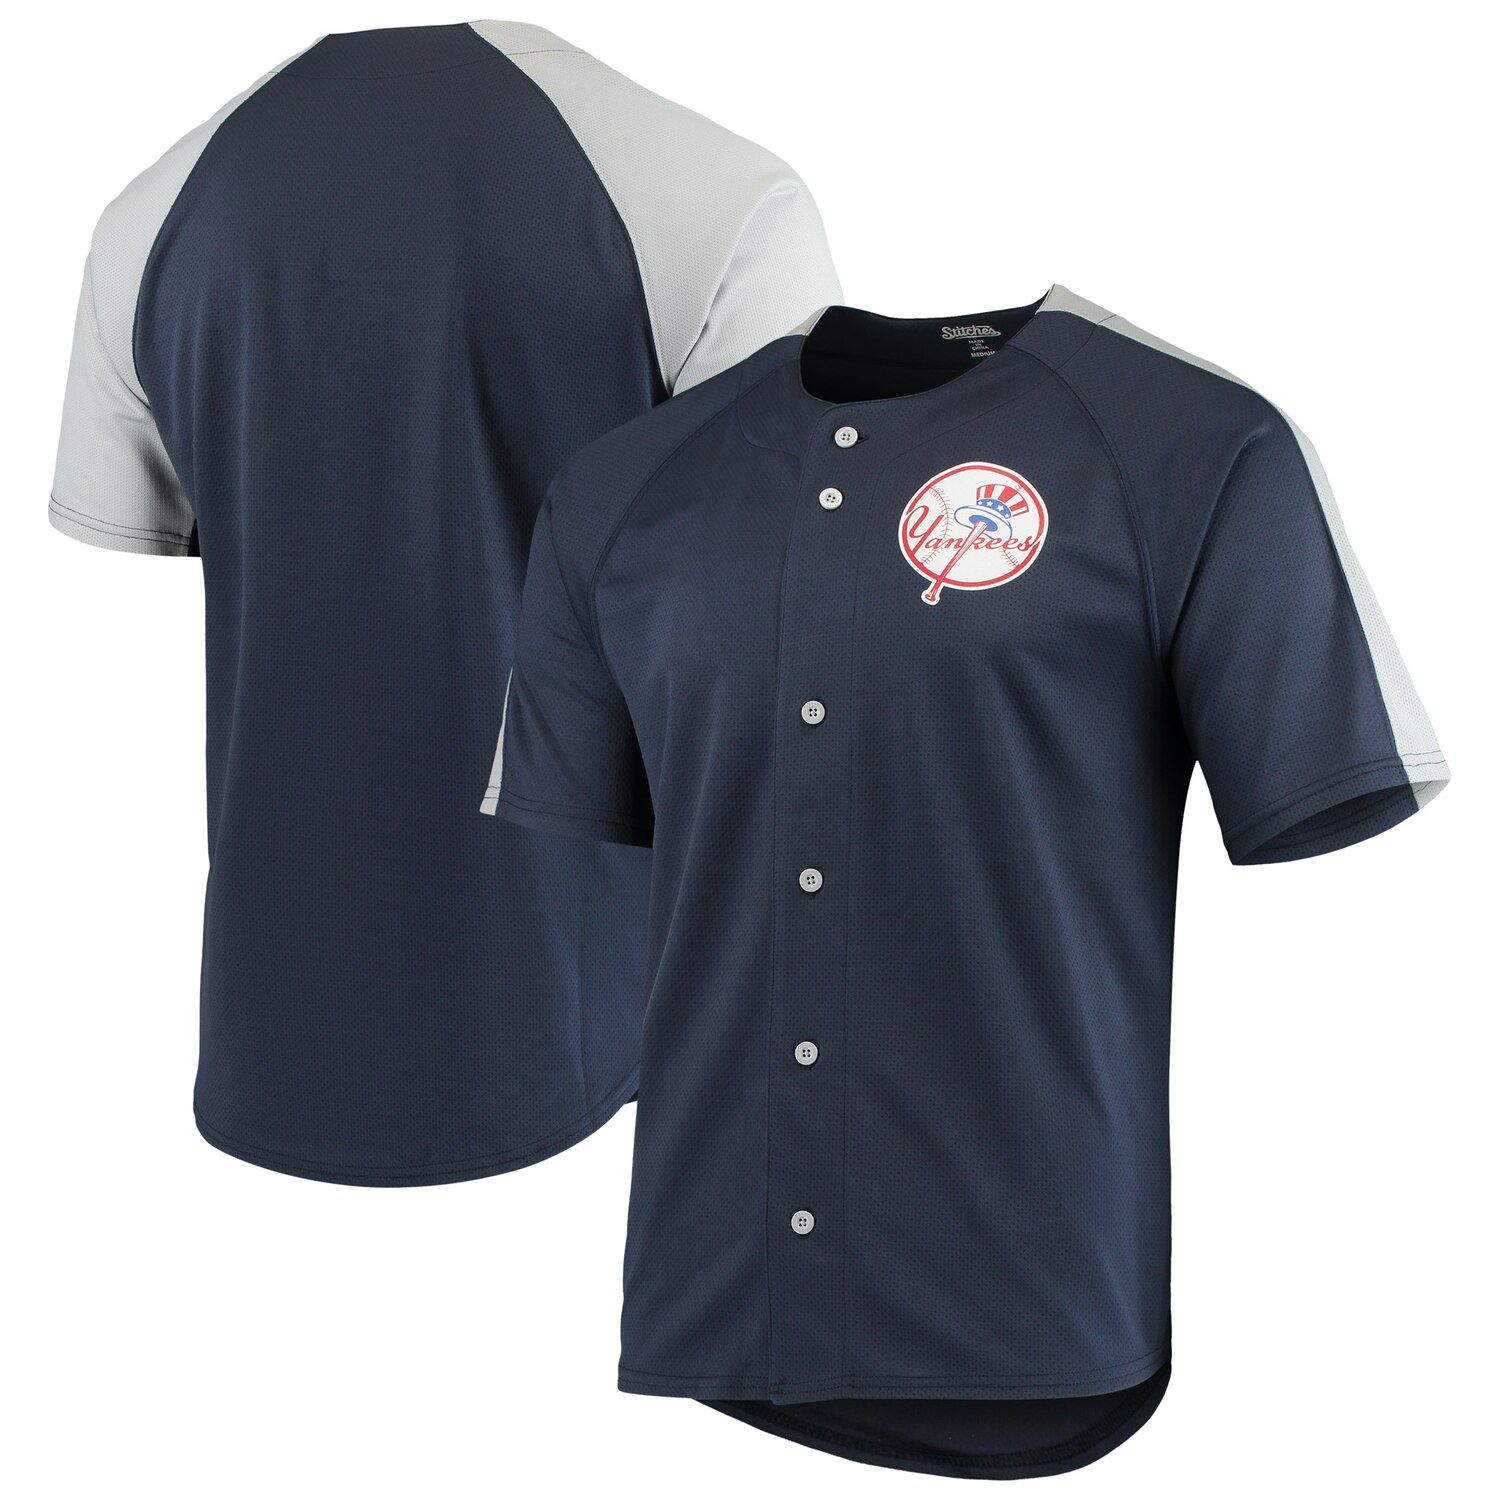 stitches athletic gear yankees